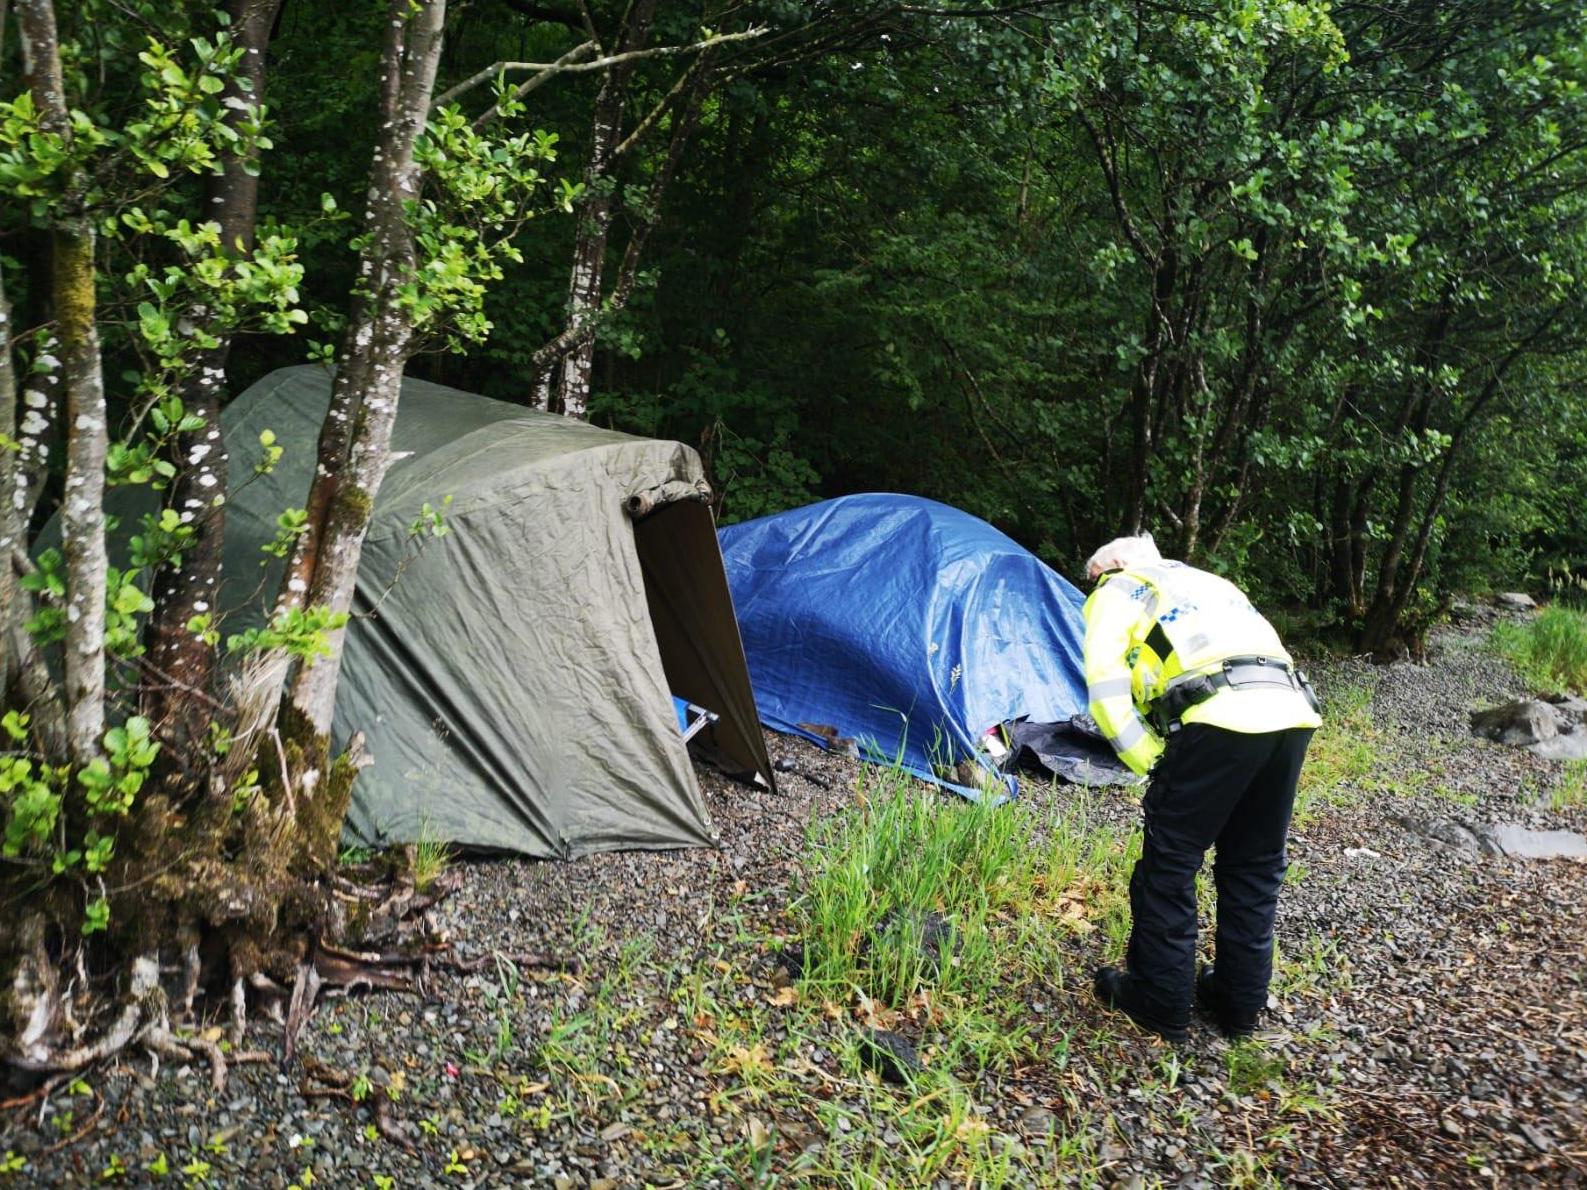 An officer speaks to people illegally camping in the Lake District. Overnight stays are not yet allowed until coronavirus lockdown measures ease further on 4 July